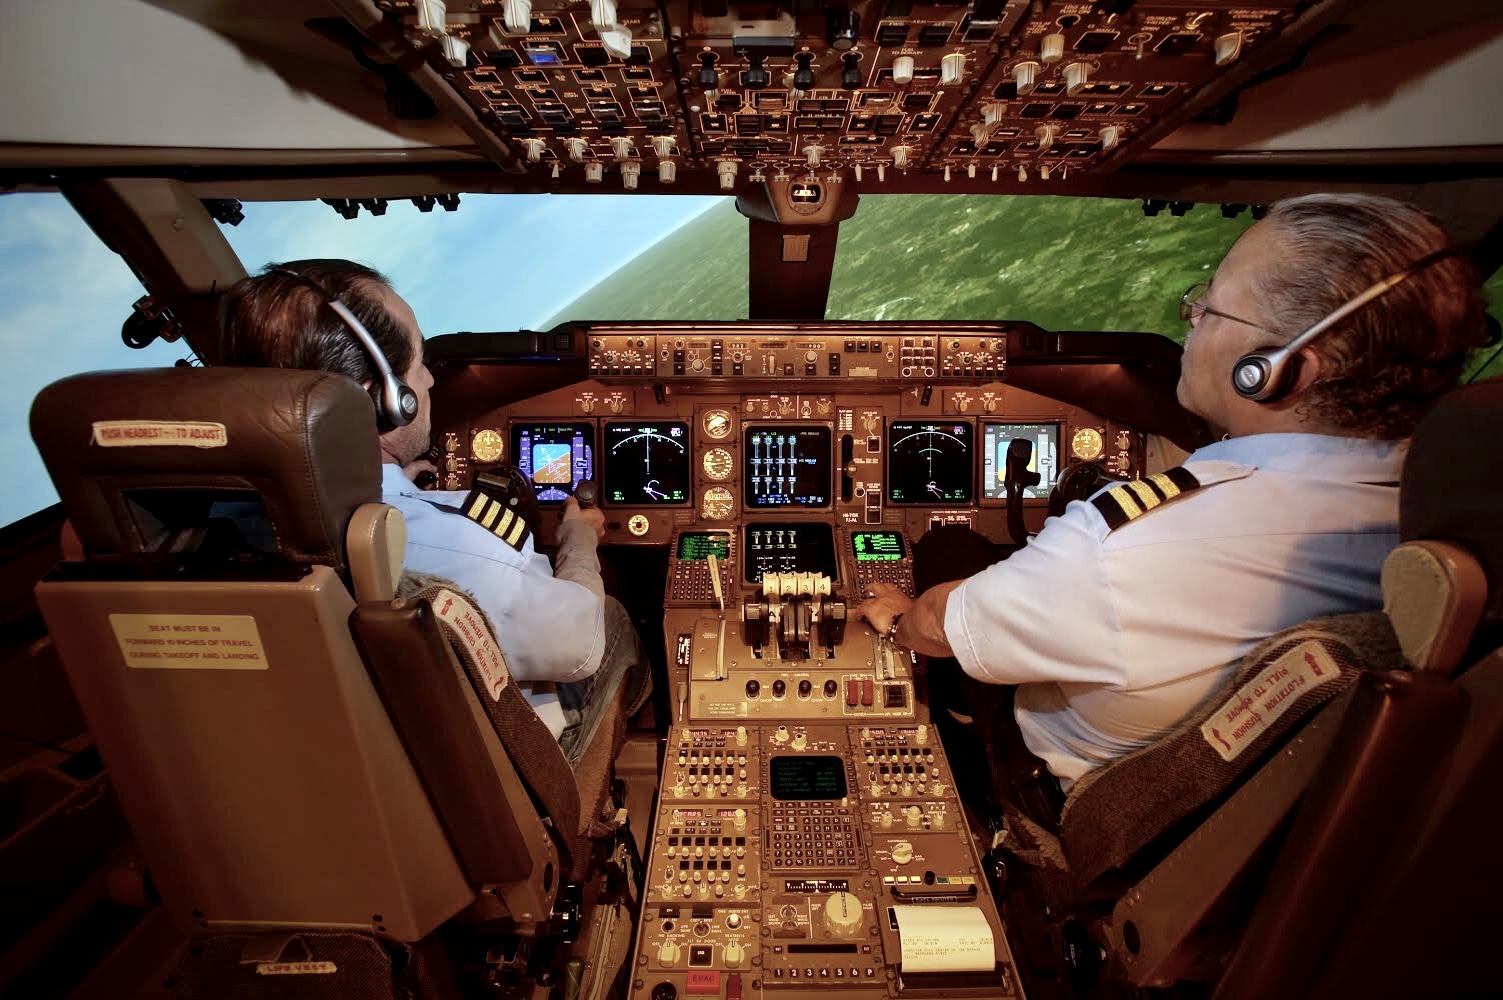 Two pilots in the cockpit of a flight simulator